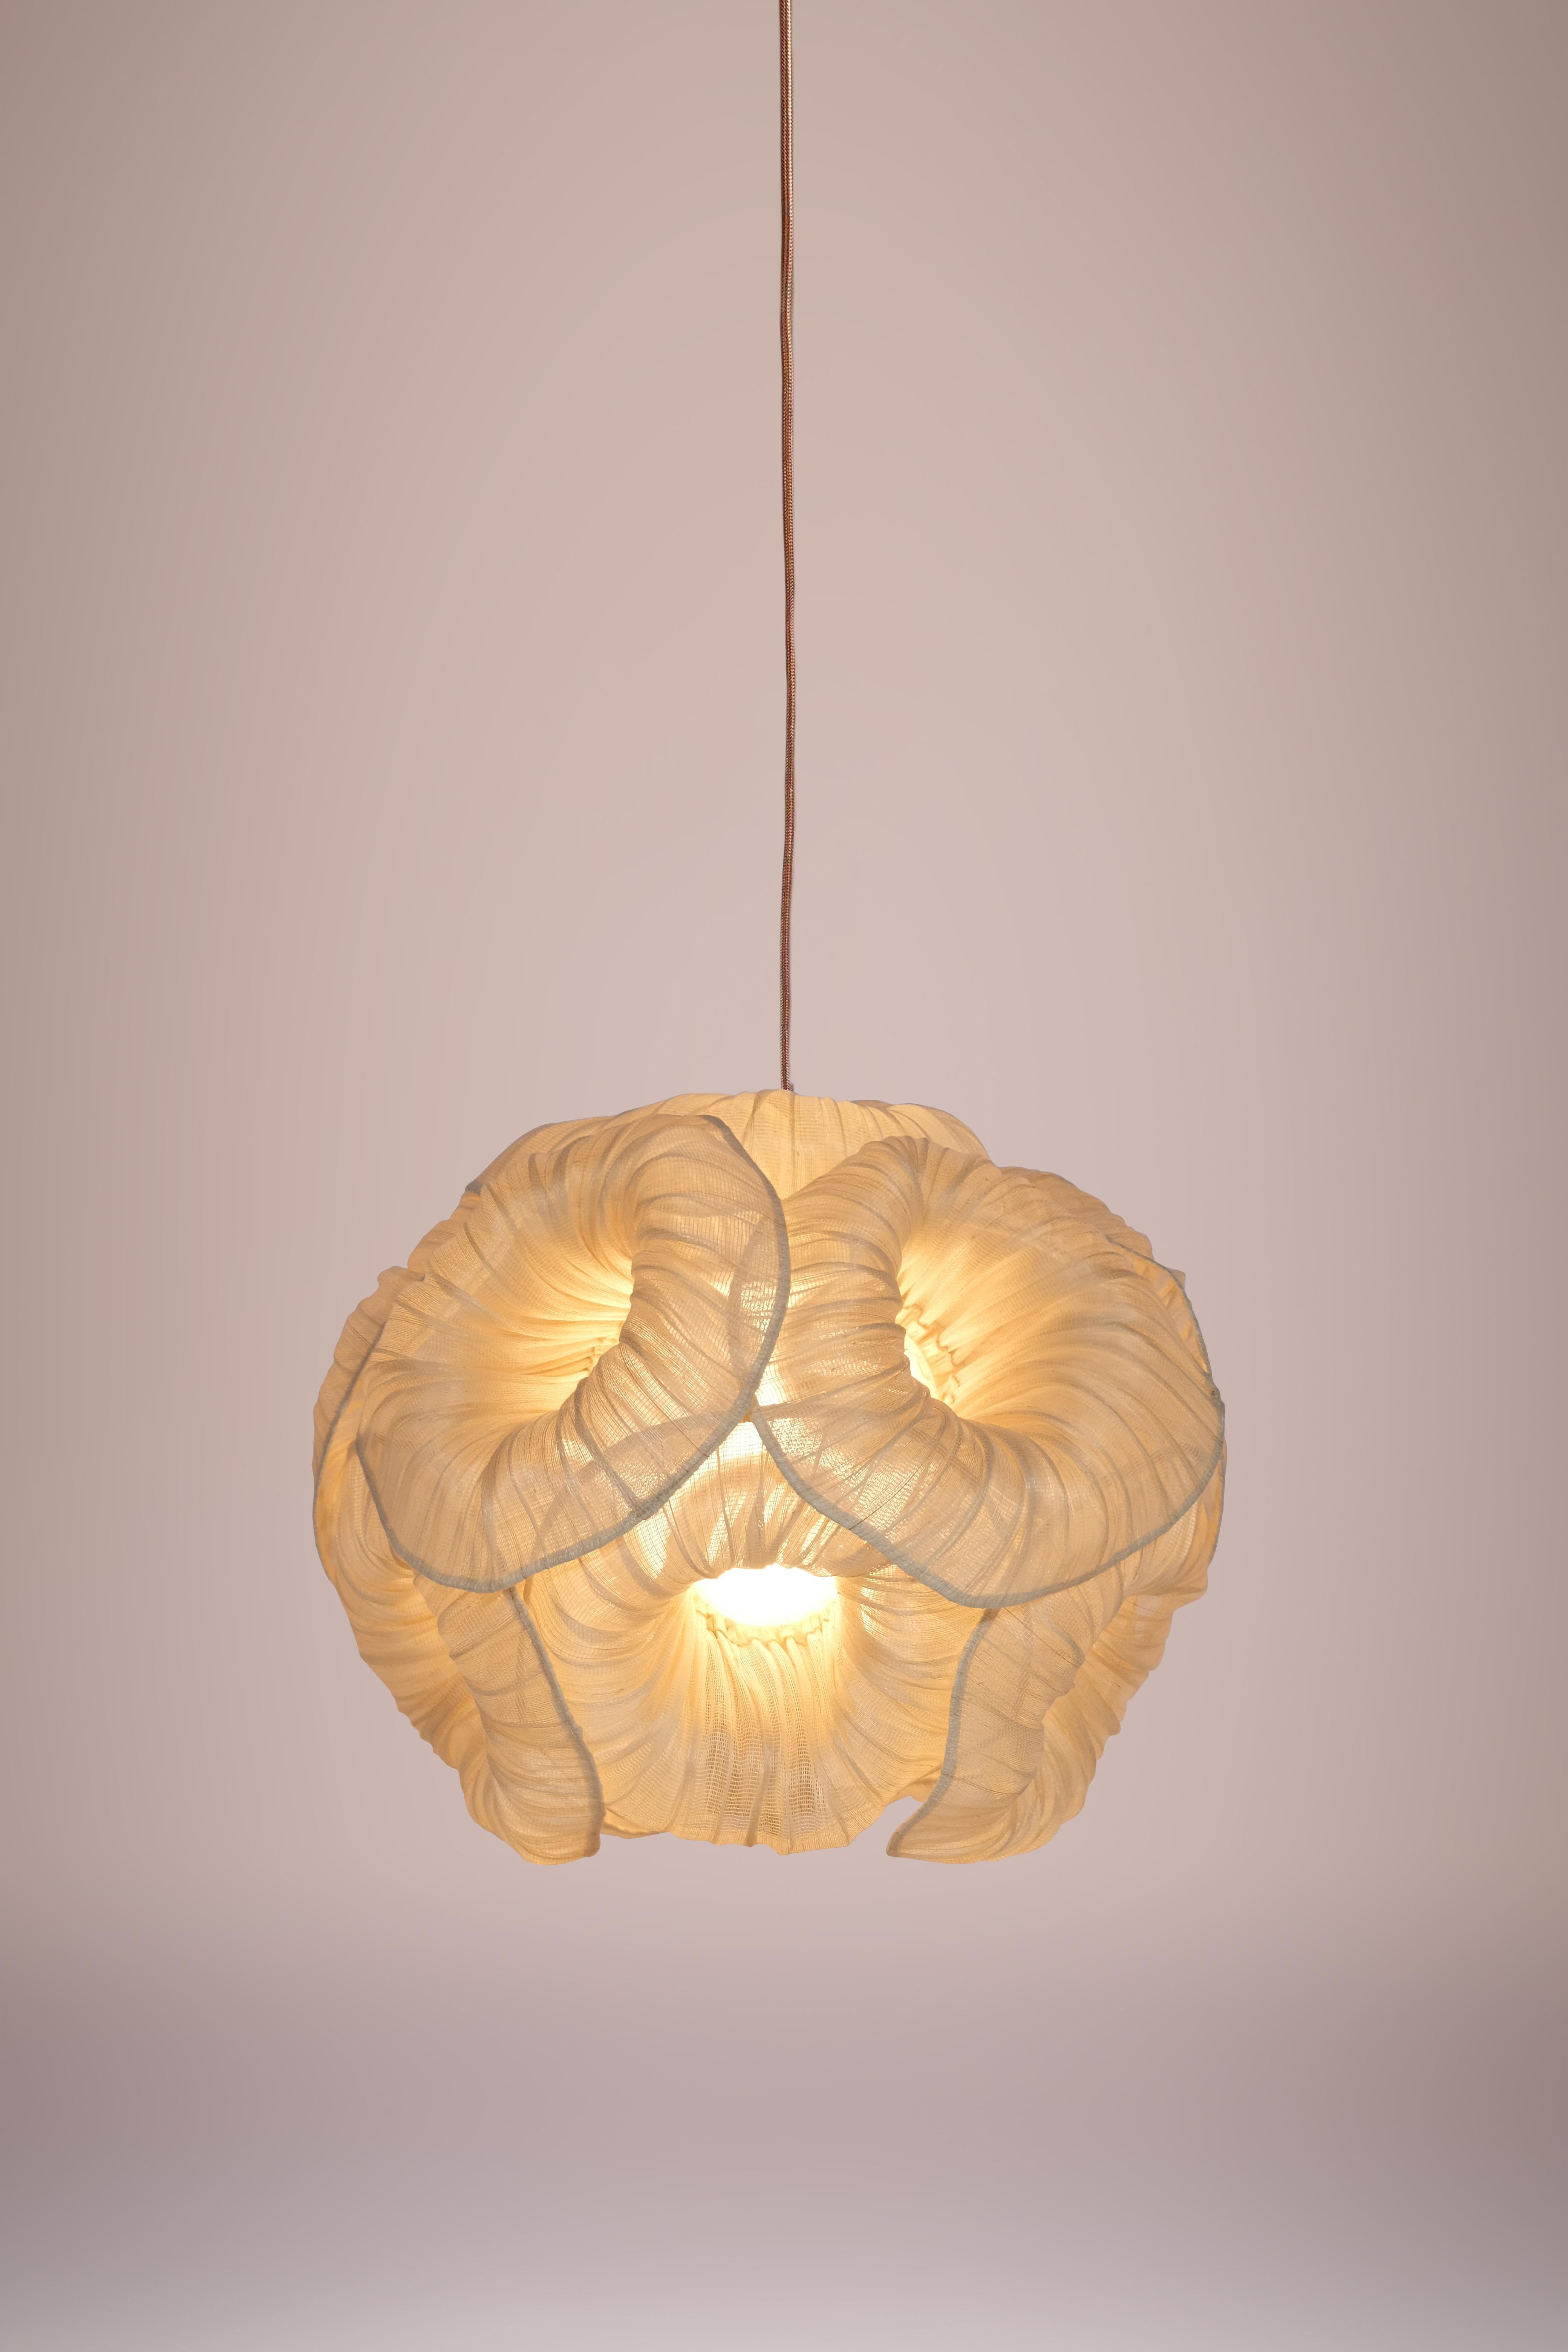 Anemone pendant lamp by Mirei Monticelli
Dimensions: D 35 cm
Materials: Banaca fabric
Also available in hand-painted fabric.

The simple elegance of the Anemone Pendant Lamp provides an eye-catching aesthetic in any home while diffusing ambient